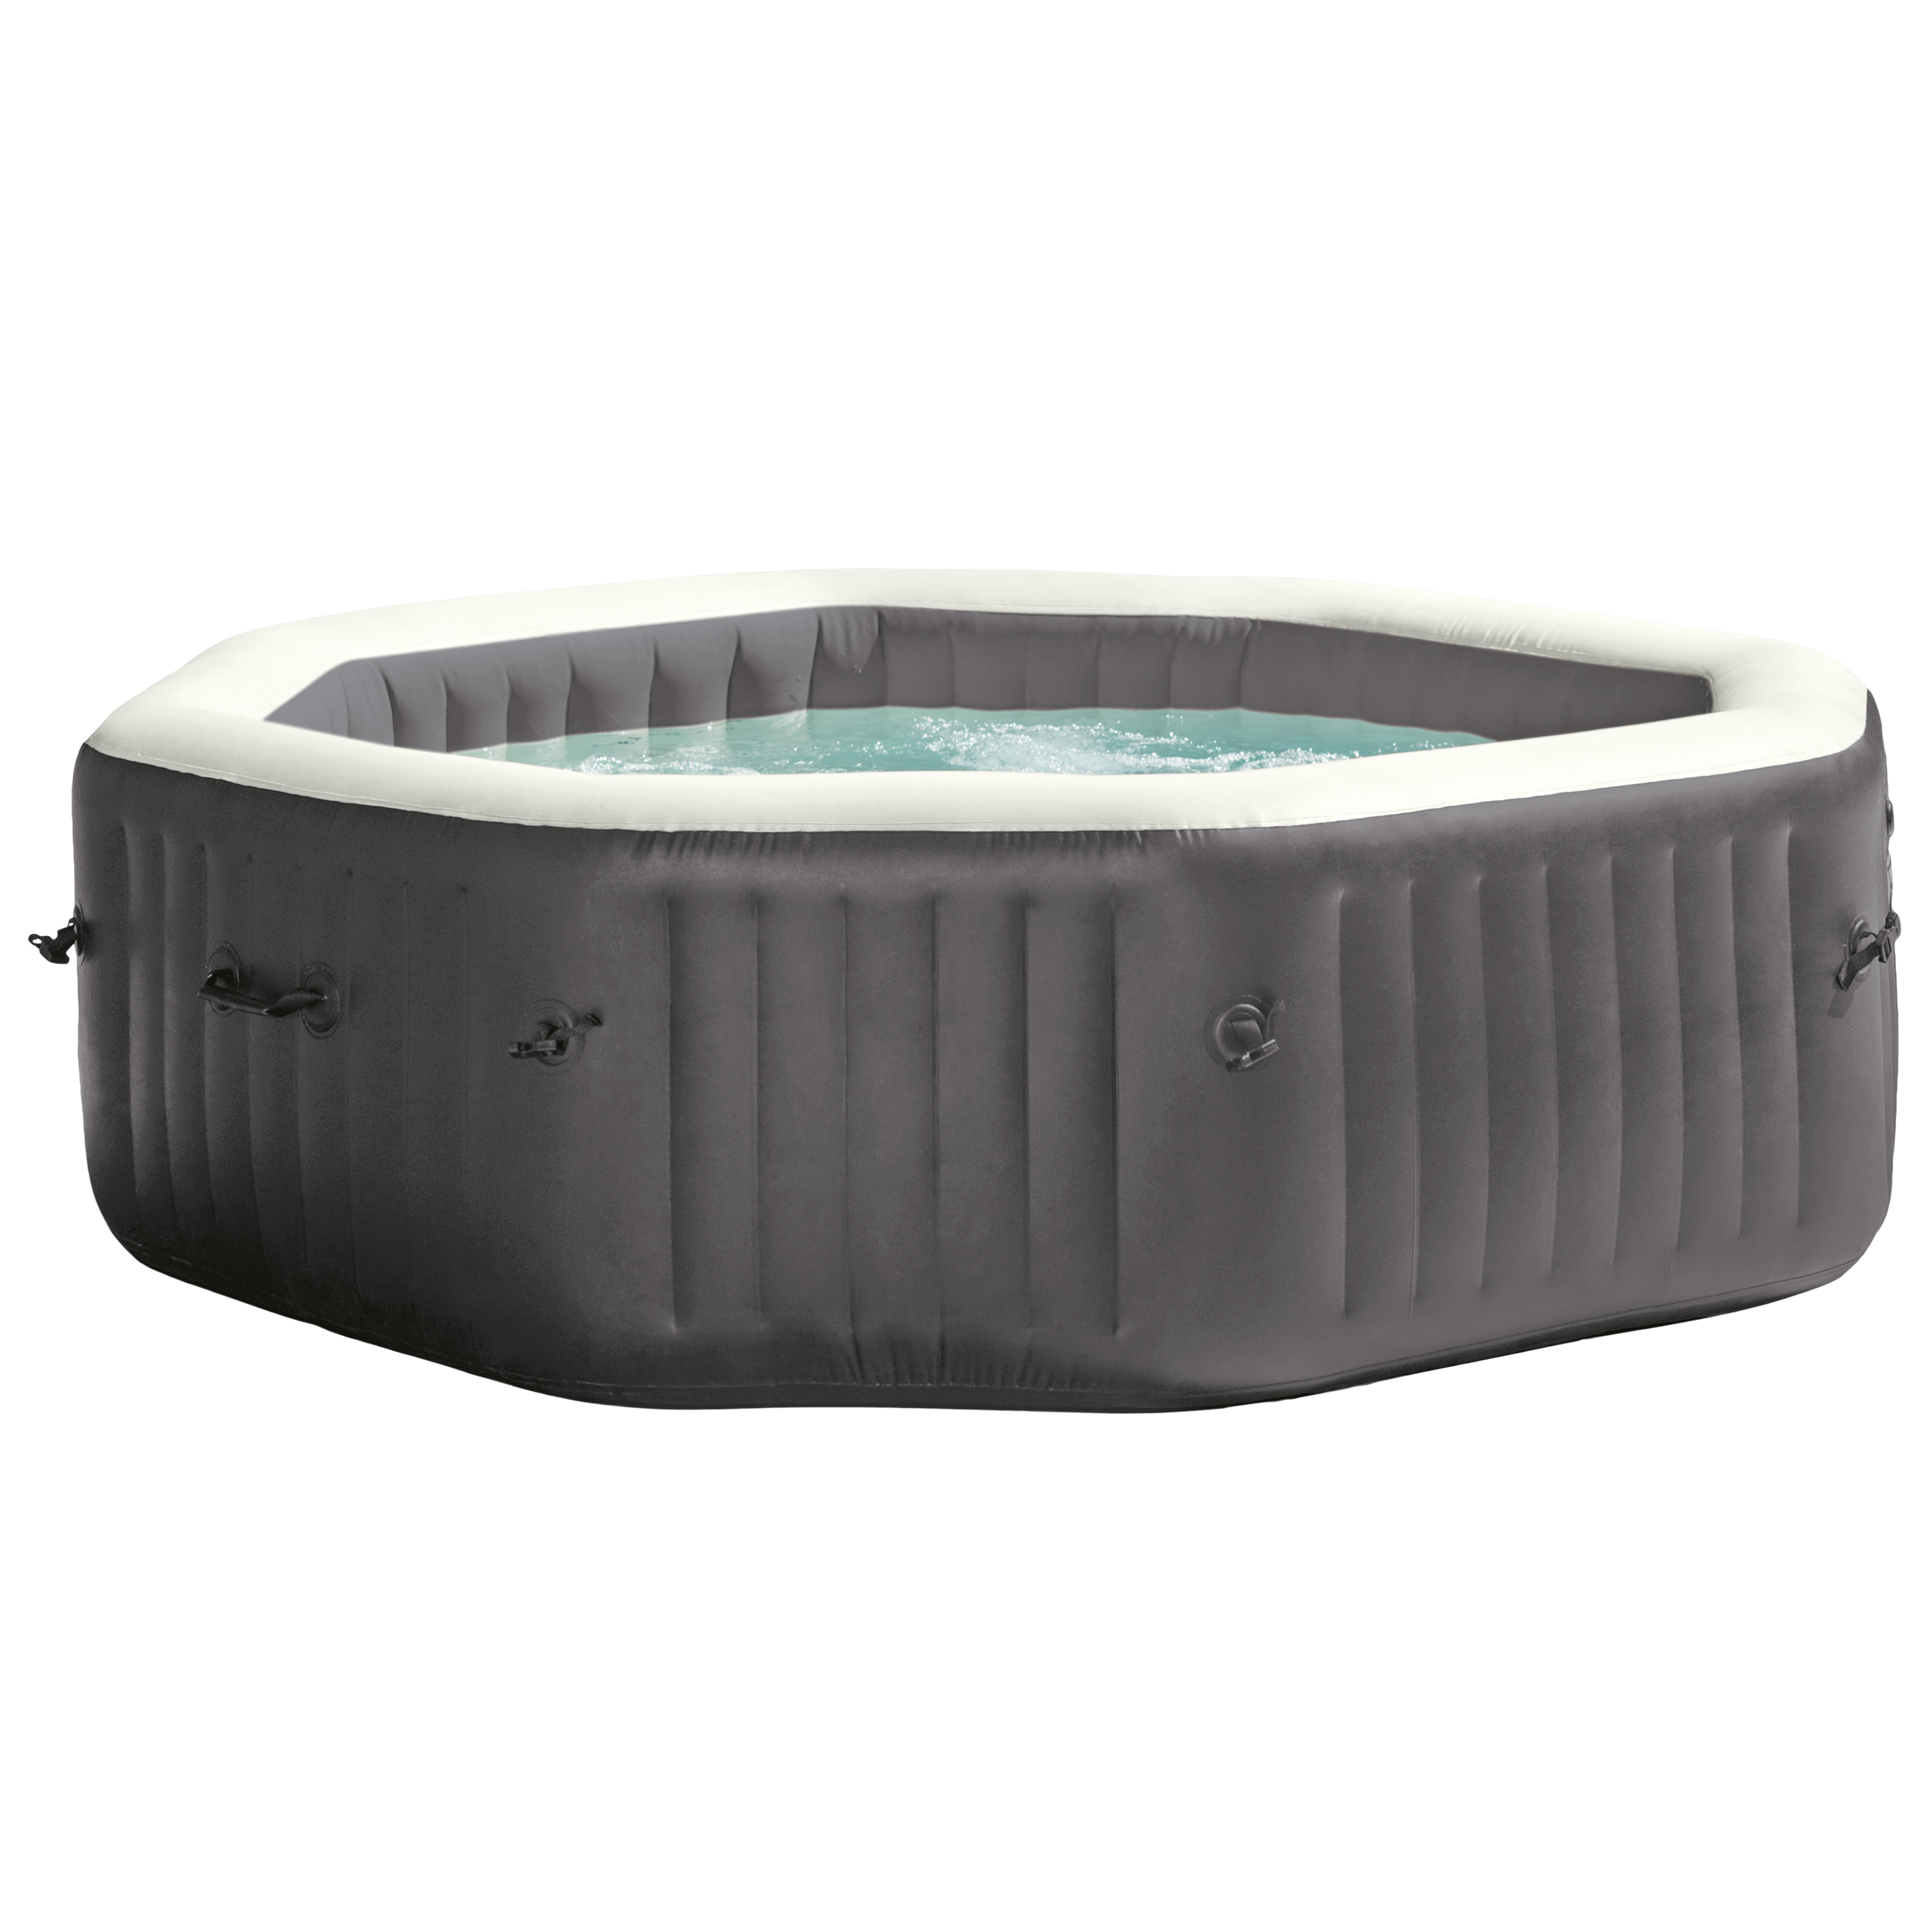 Intex 140 Bubble Jets 6-Person Octagonal Portable Inflatable Hot Tub Spa - image 1 of 7